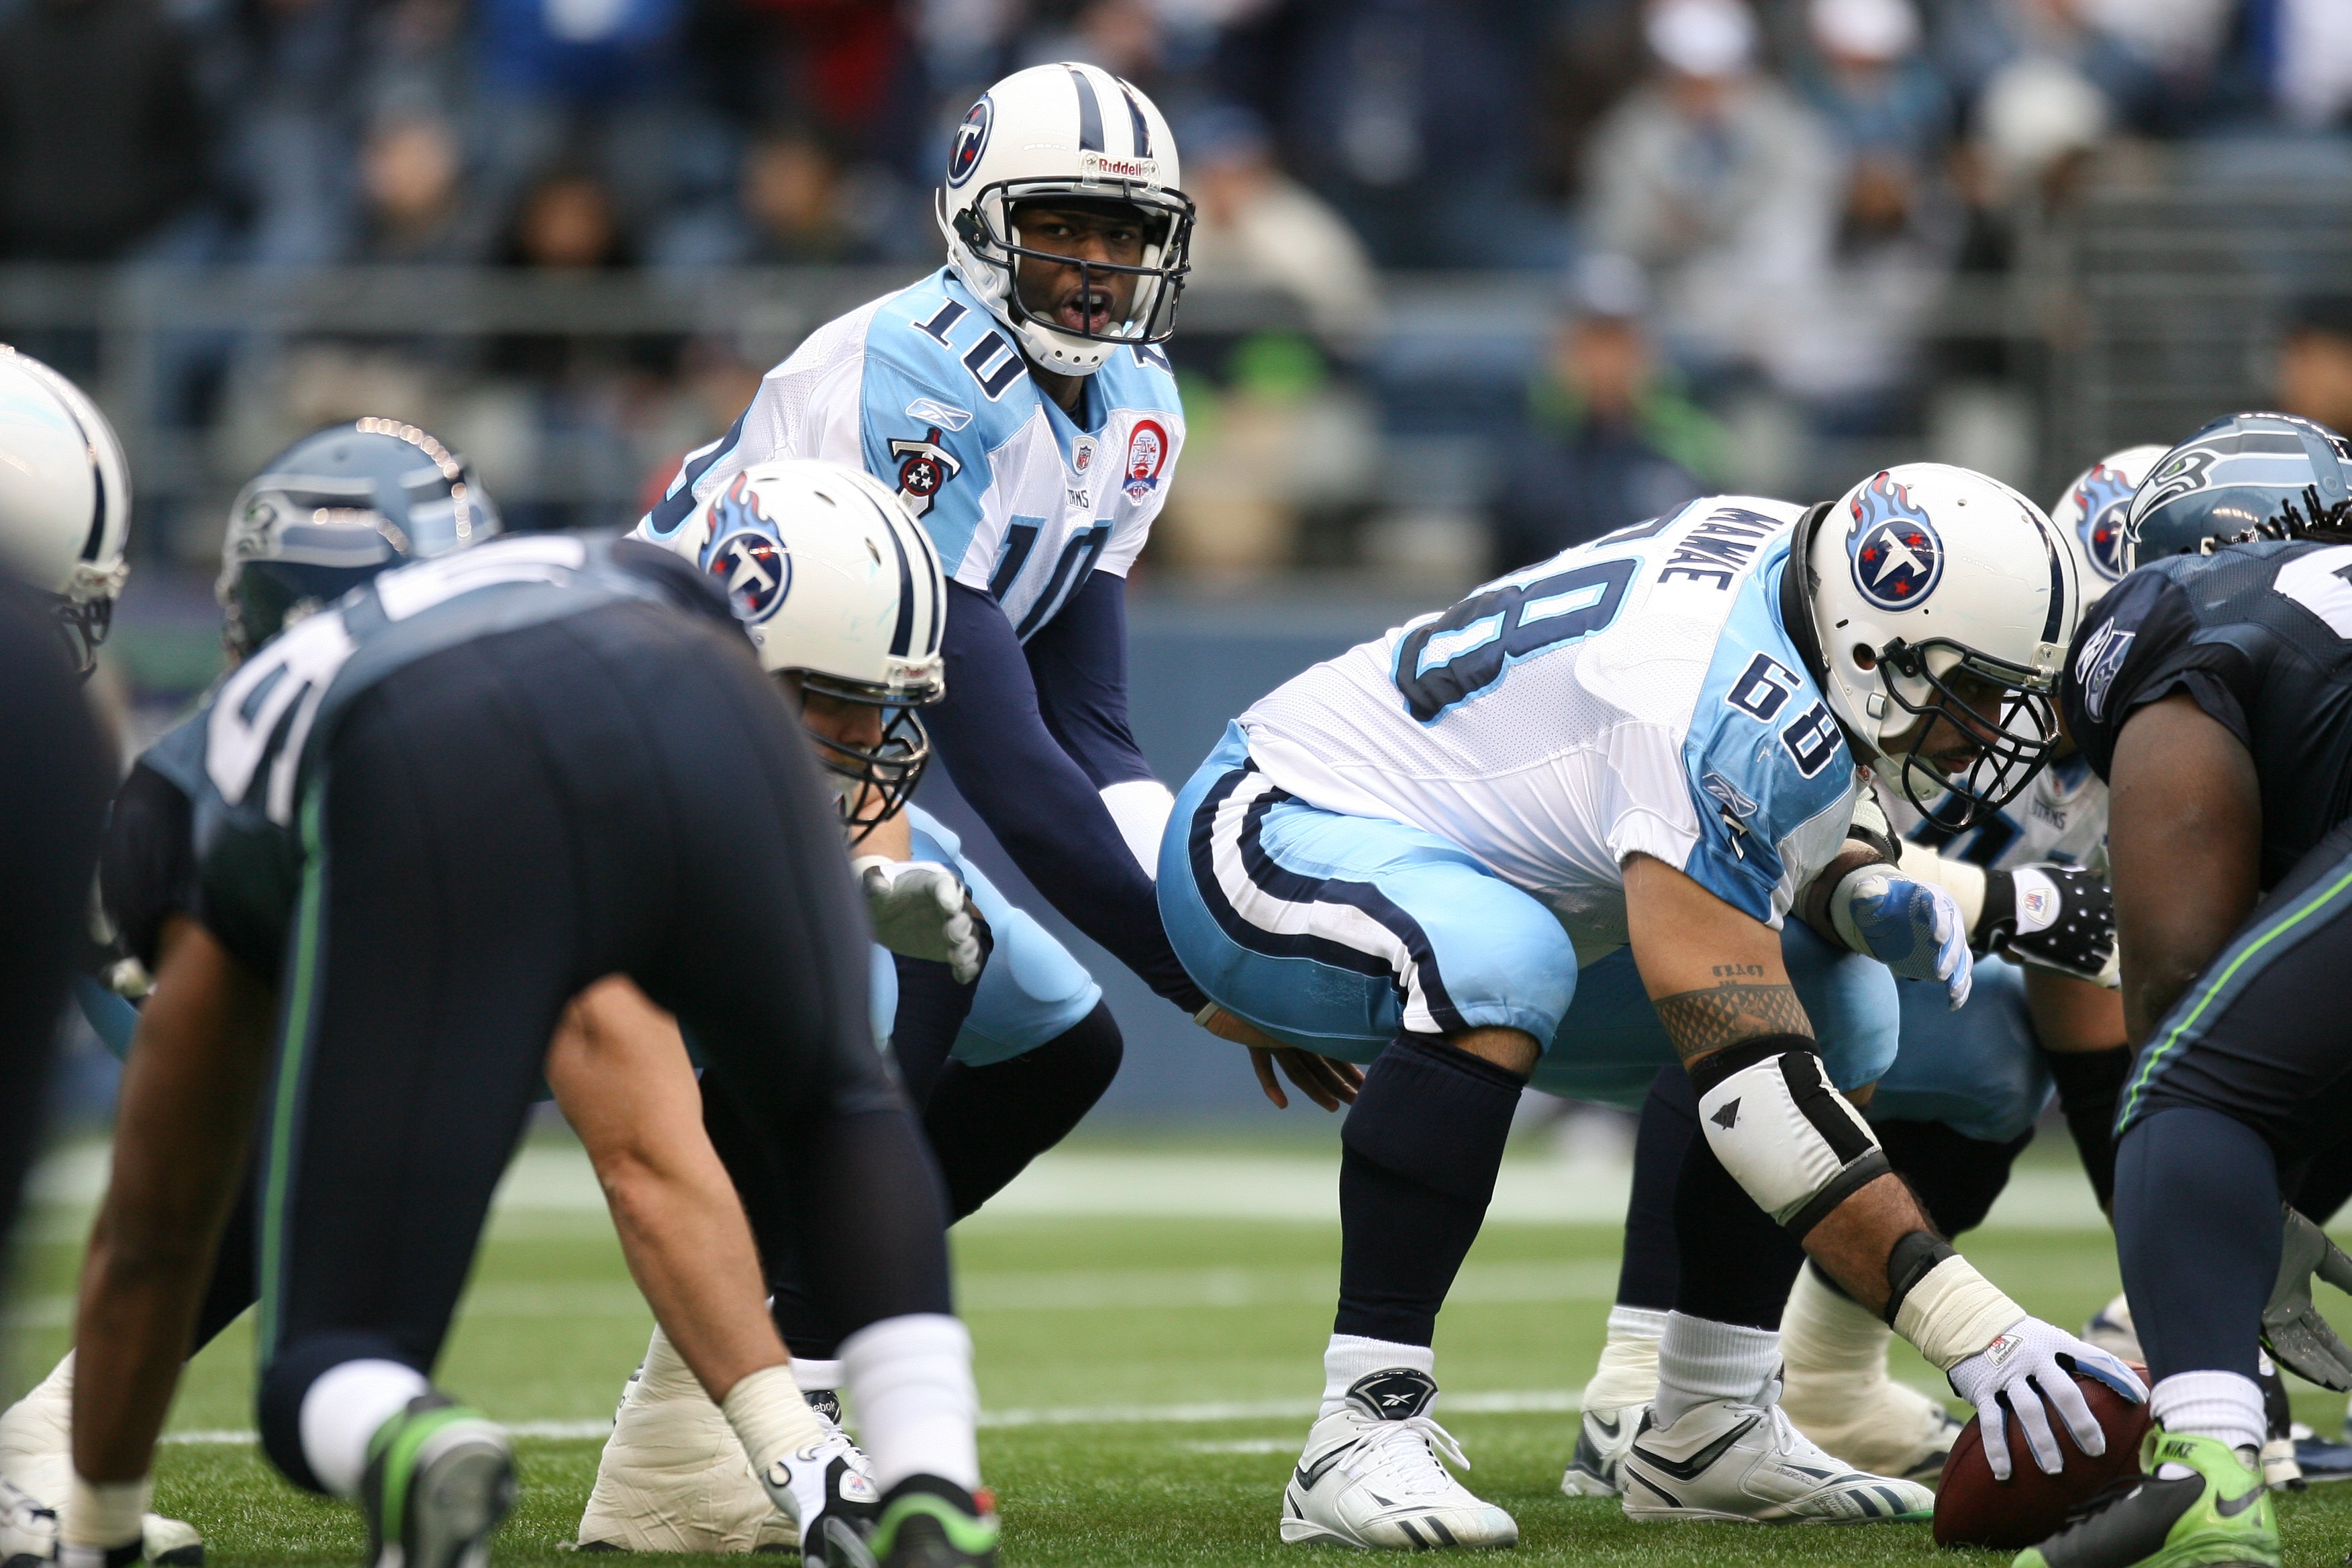 How To Watch The Tennessee Titans' NFL Preseason Game